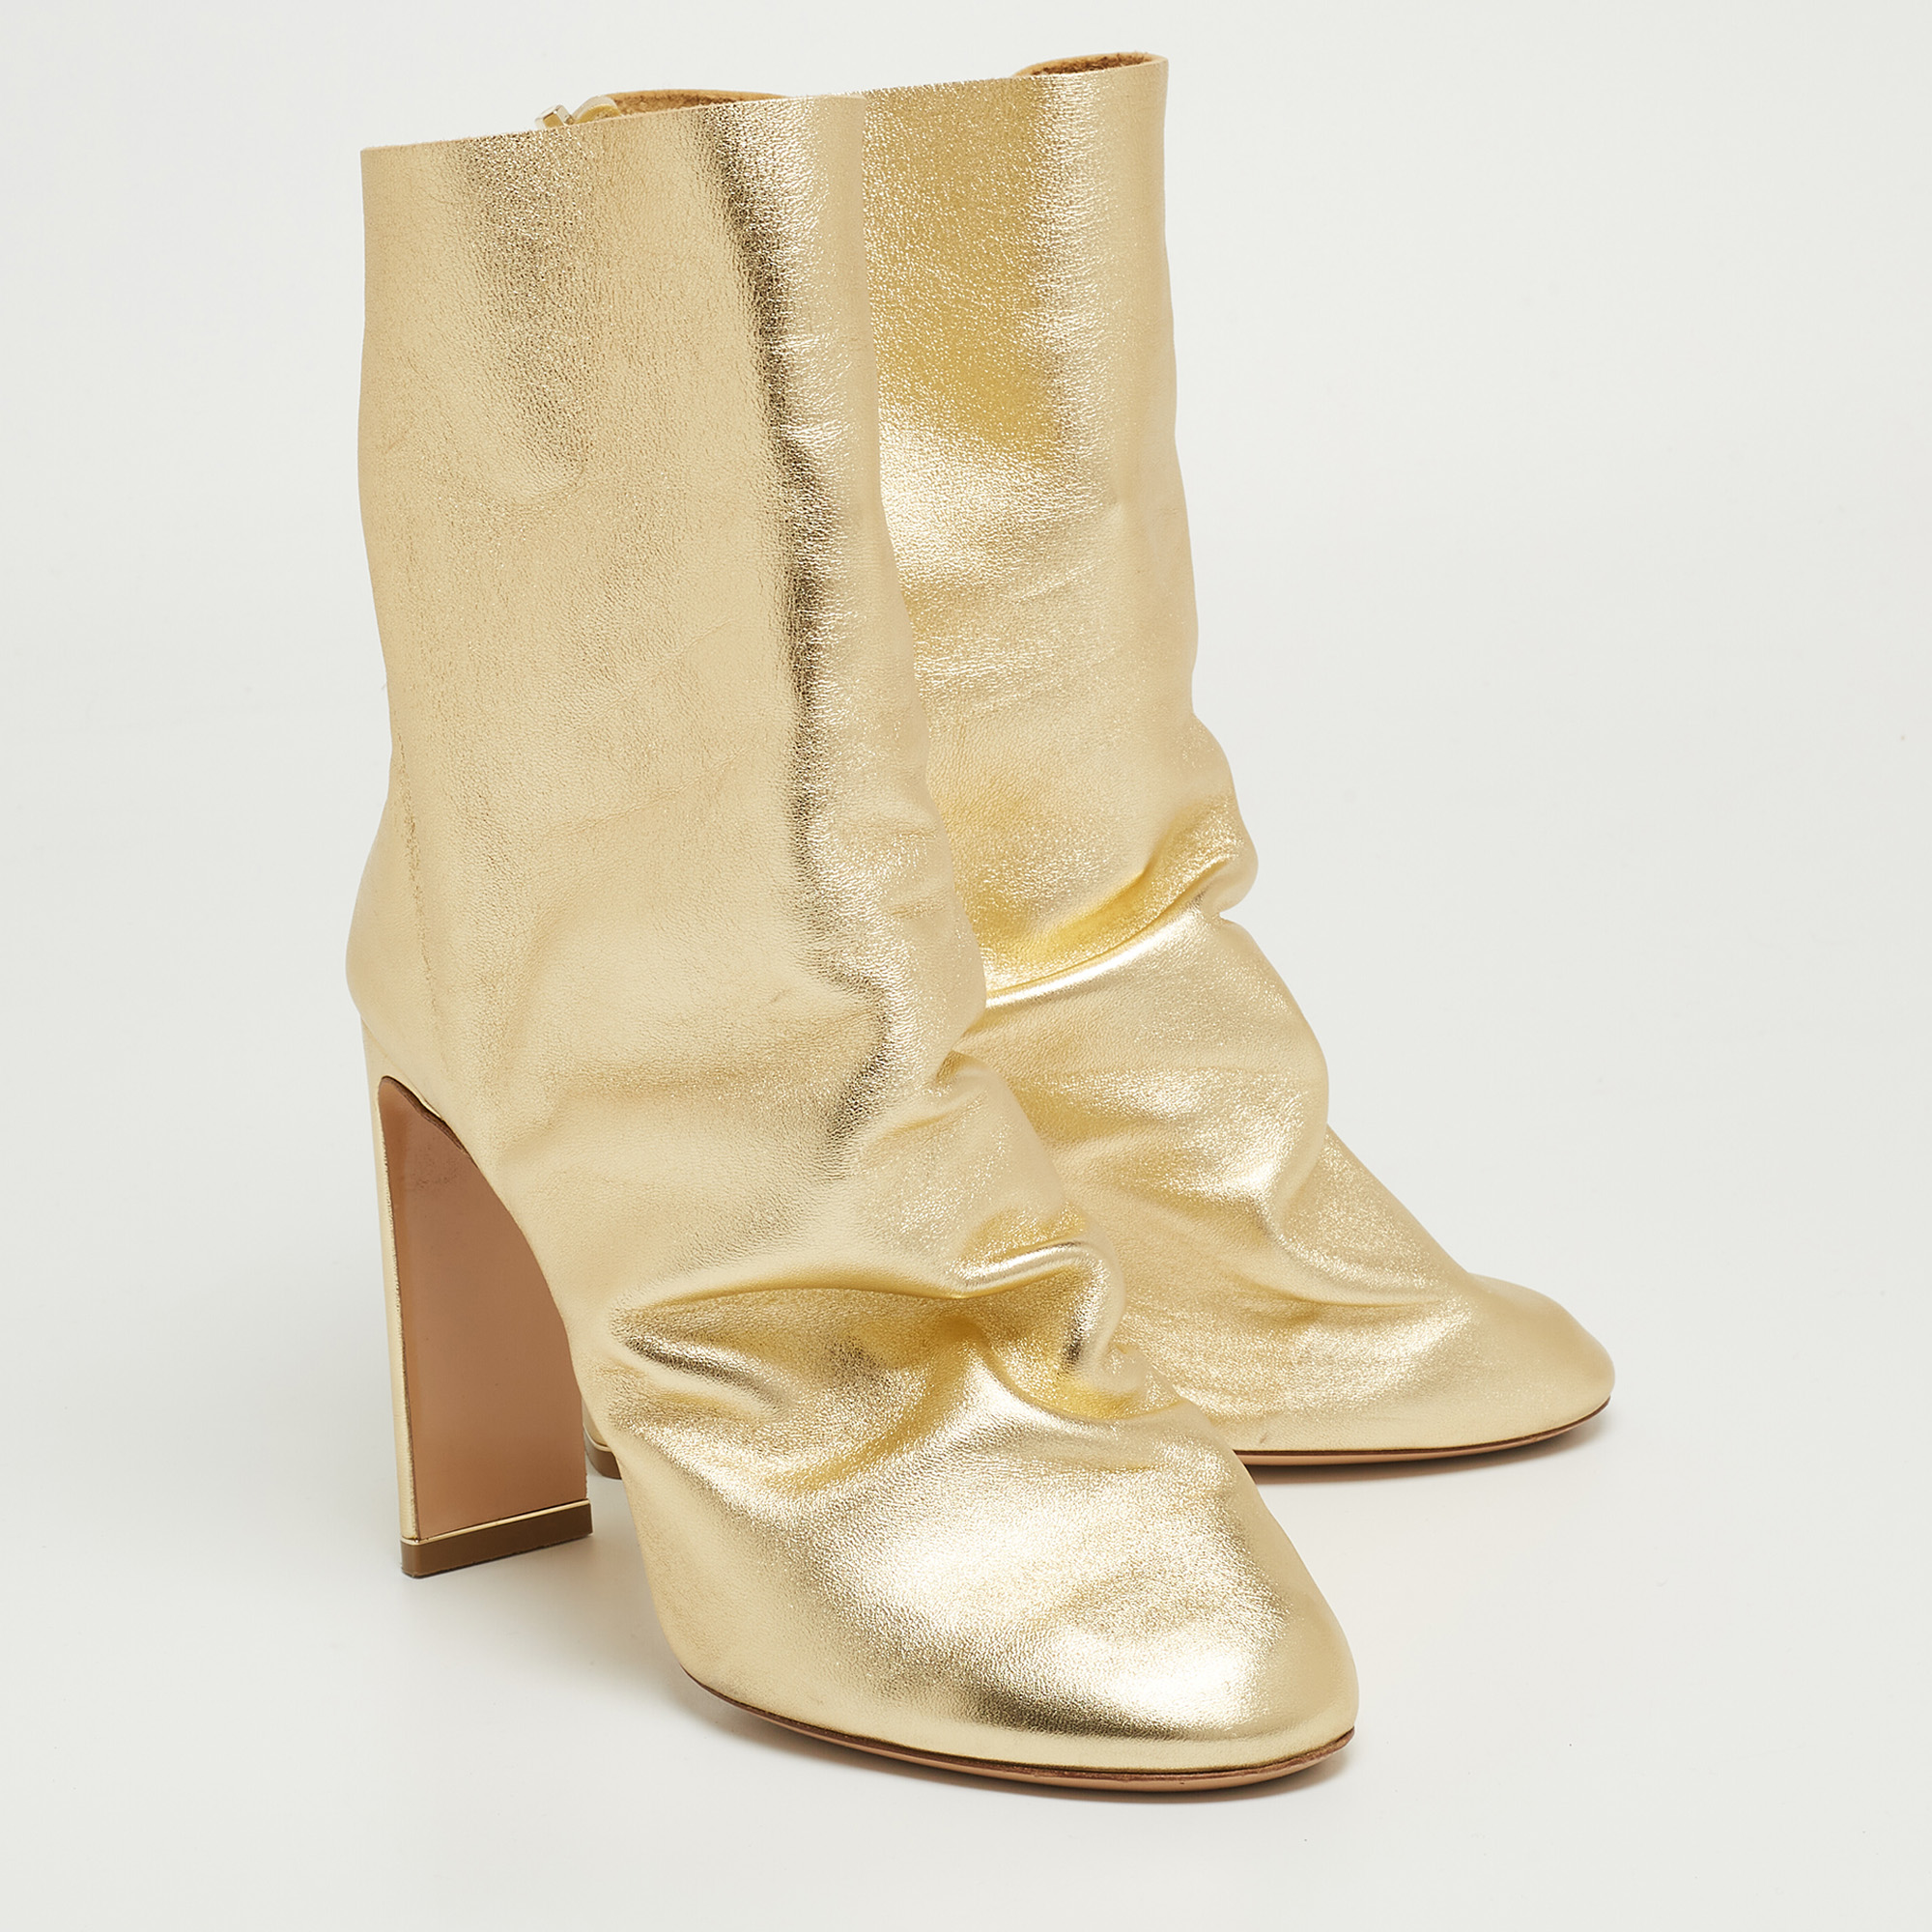 Nicholas Kirkwood Metallic Gold Foil Leather D'arcy Ruched Ankle Booties Size 38.5